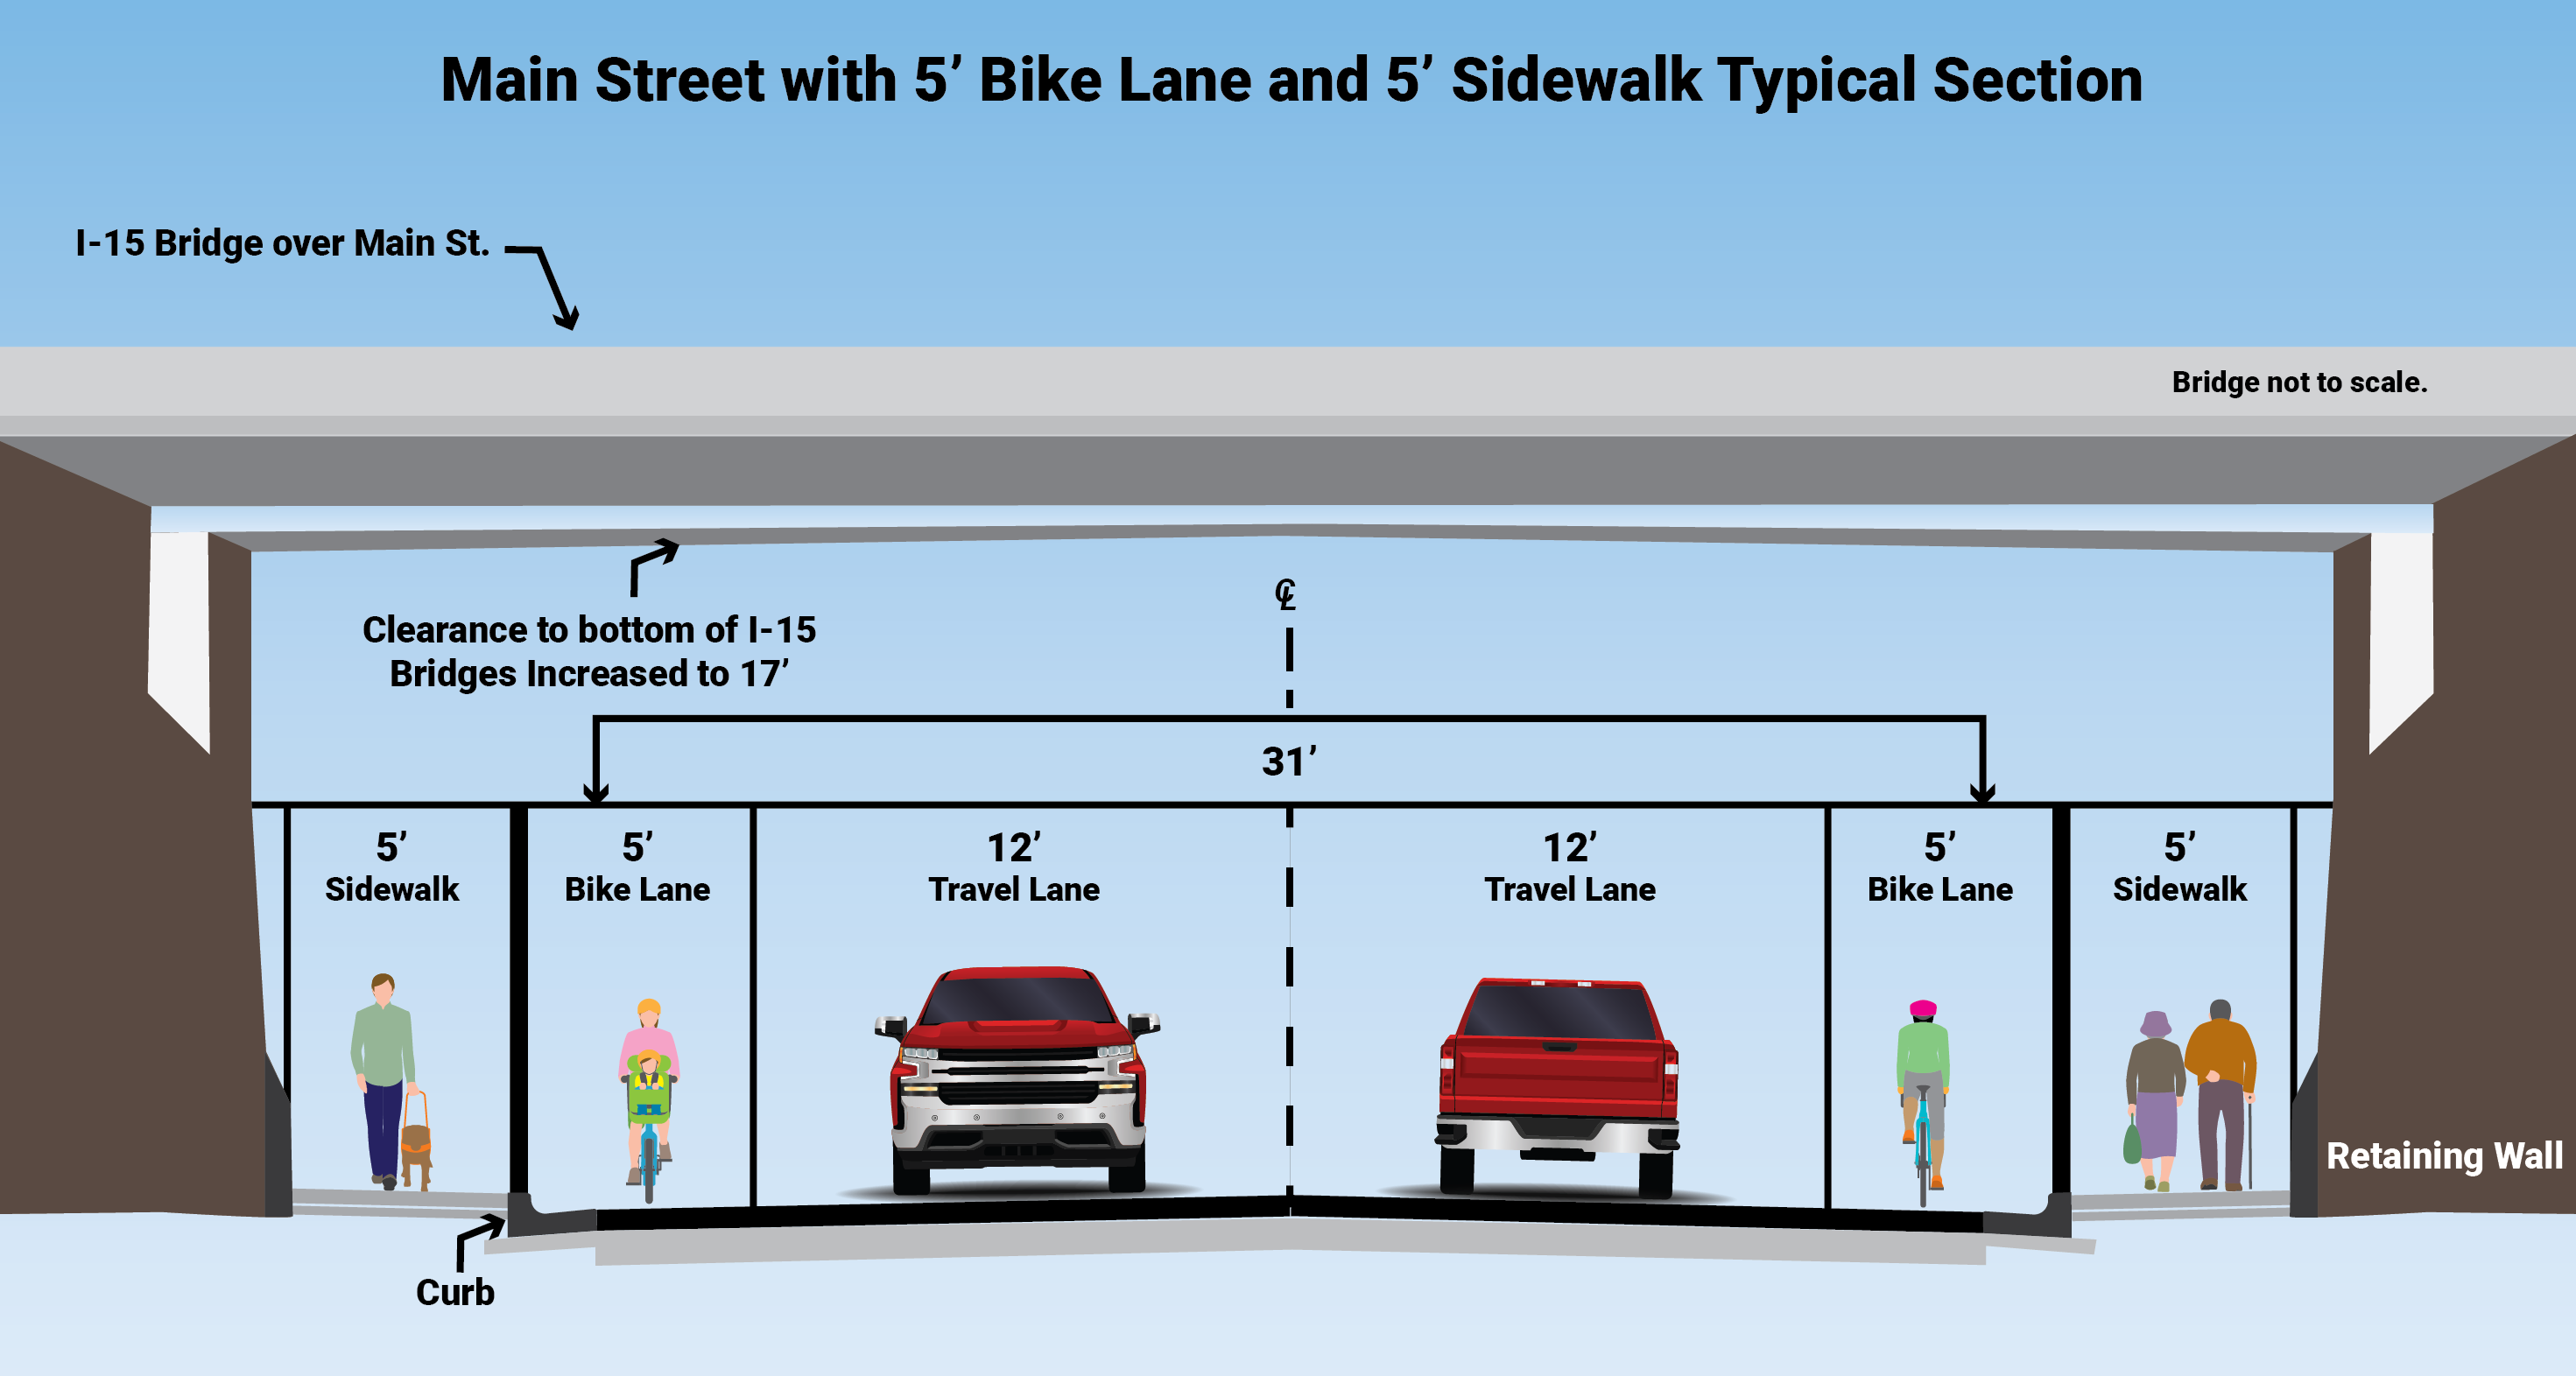 Cross section of Main Street crossing under Interstate 15 Bridge. Increased clearance of I-15 bridge to 17 feet. Main Street lane and sidewalk typicals: 5 foot sidewalk, curb separating sidewalk and bike lane, 5 foot bike lane and 12 foot travel lane in both directions.